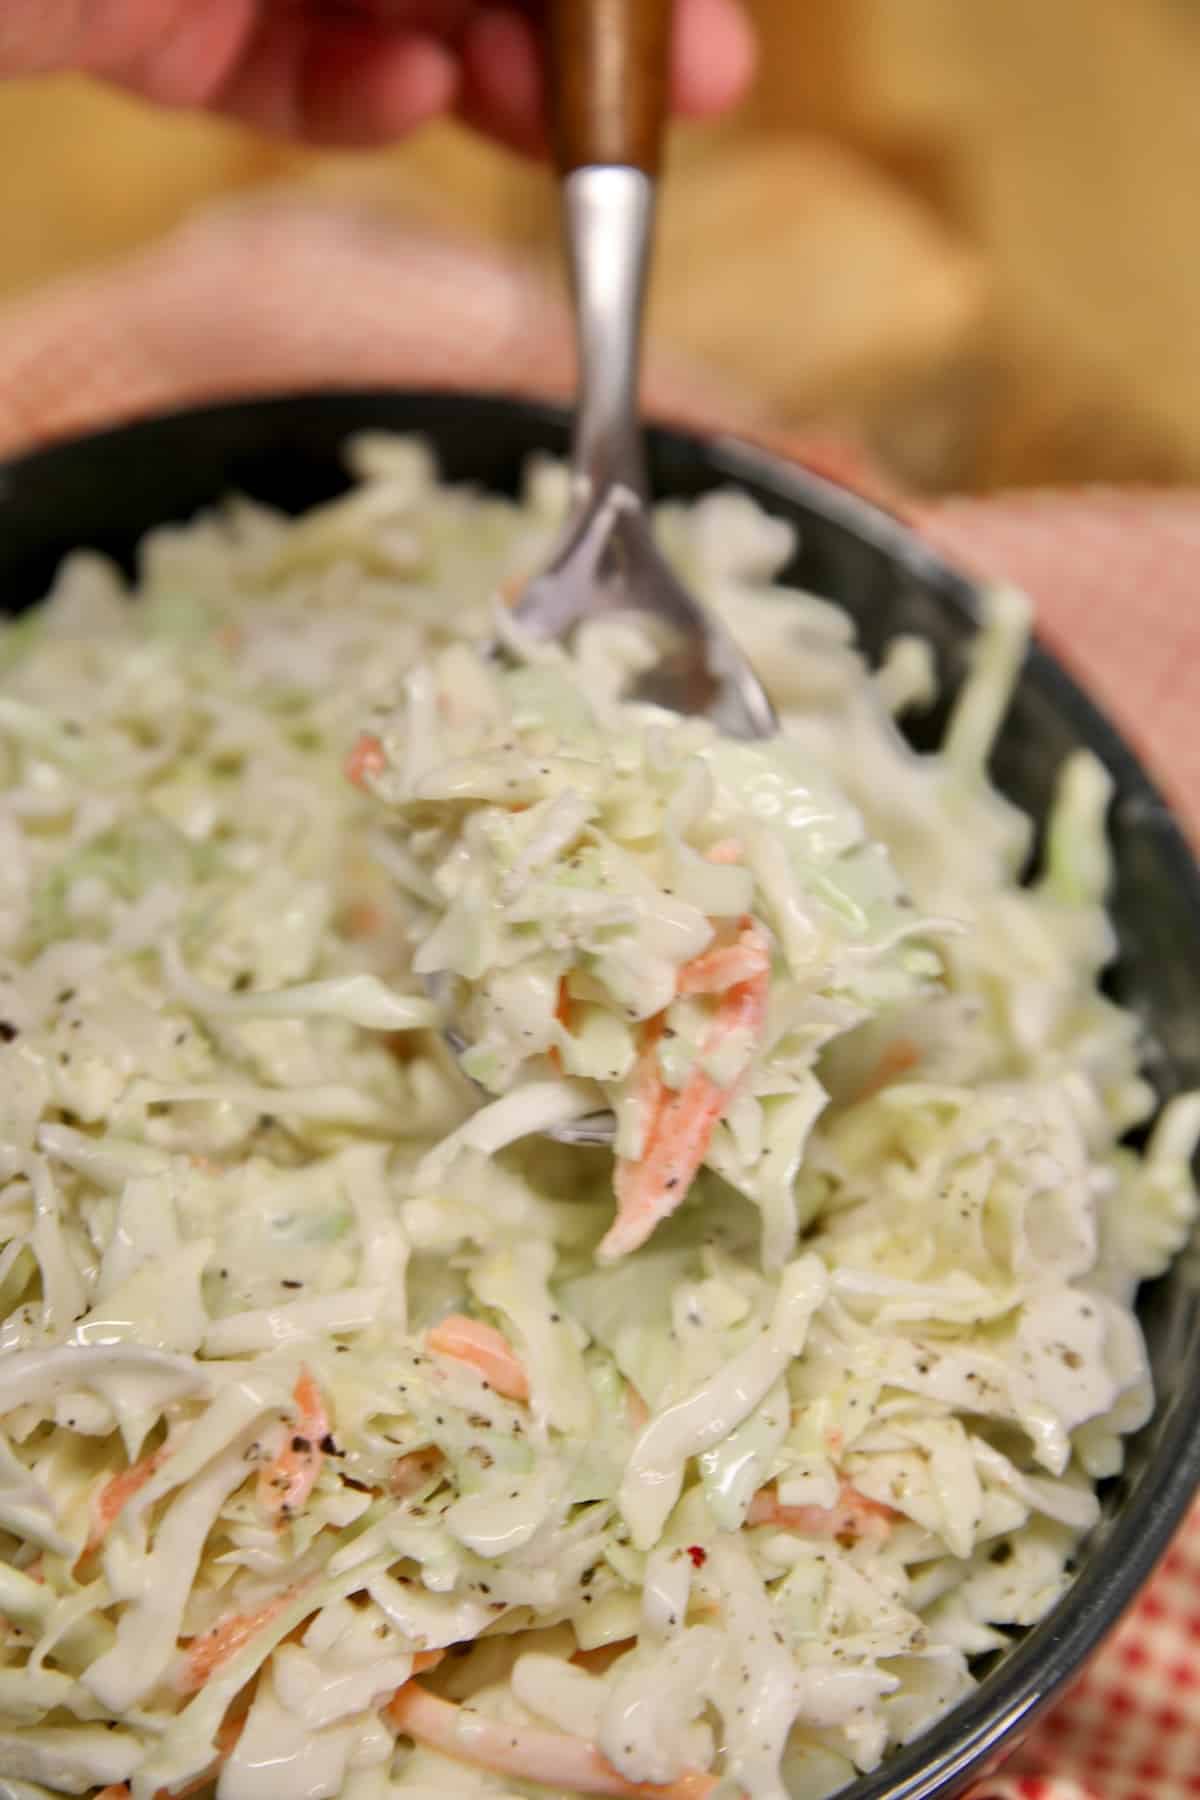 Spoonful of coleslaw in bowl.